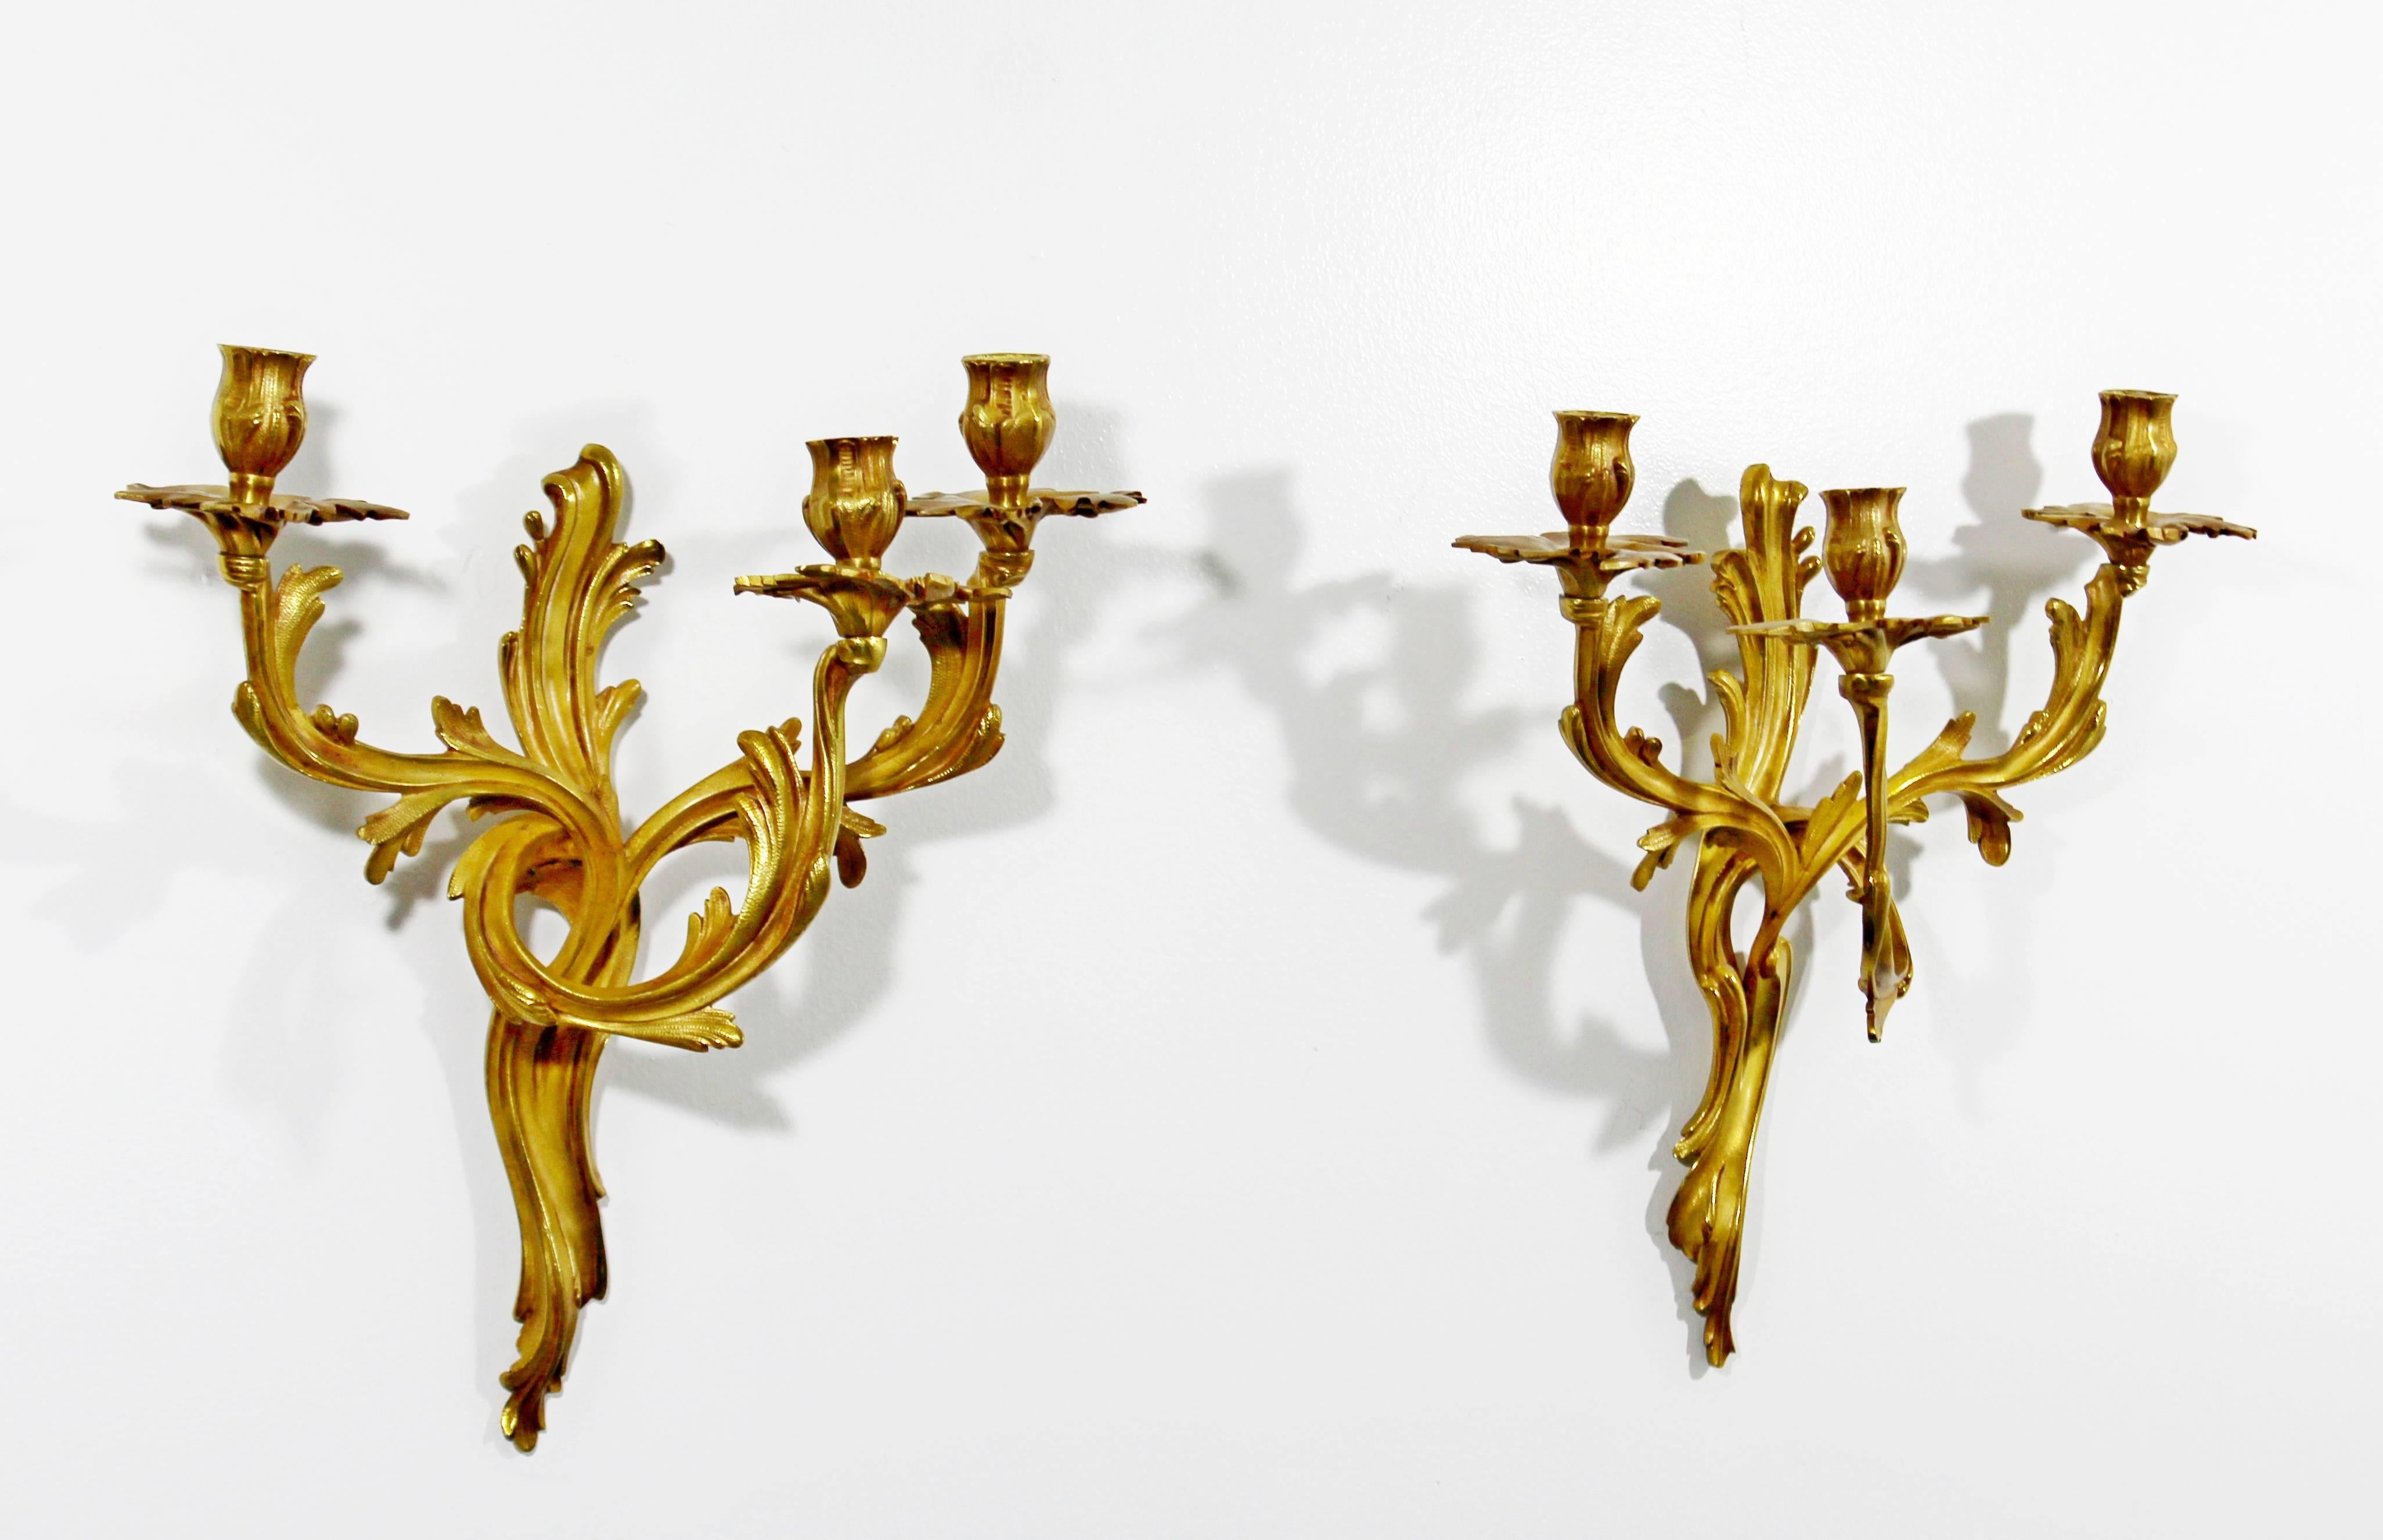 For your consideration is a beautiful, Rococo pair of gold gilt bronze wall sconces, Louis XV style. In excellent condition. The dimensions of each are 14.5